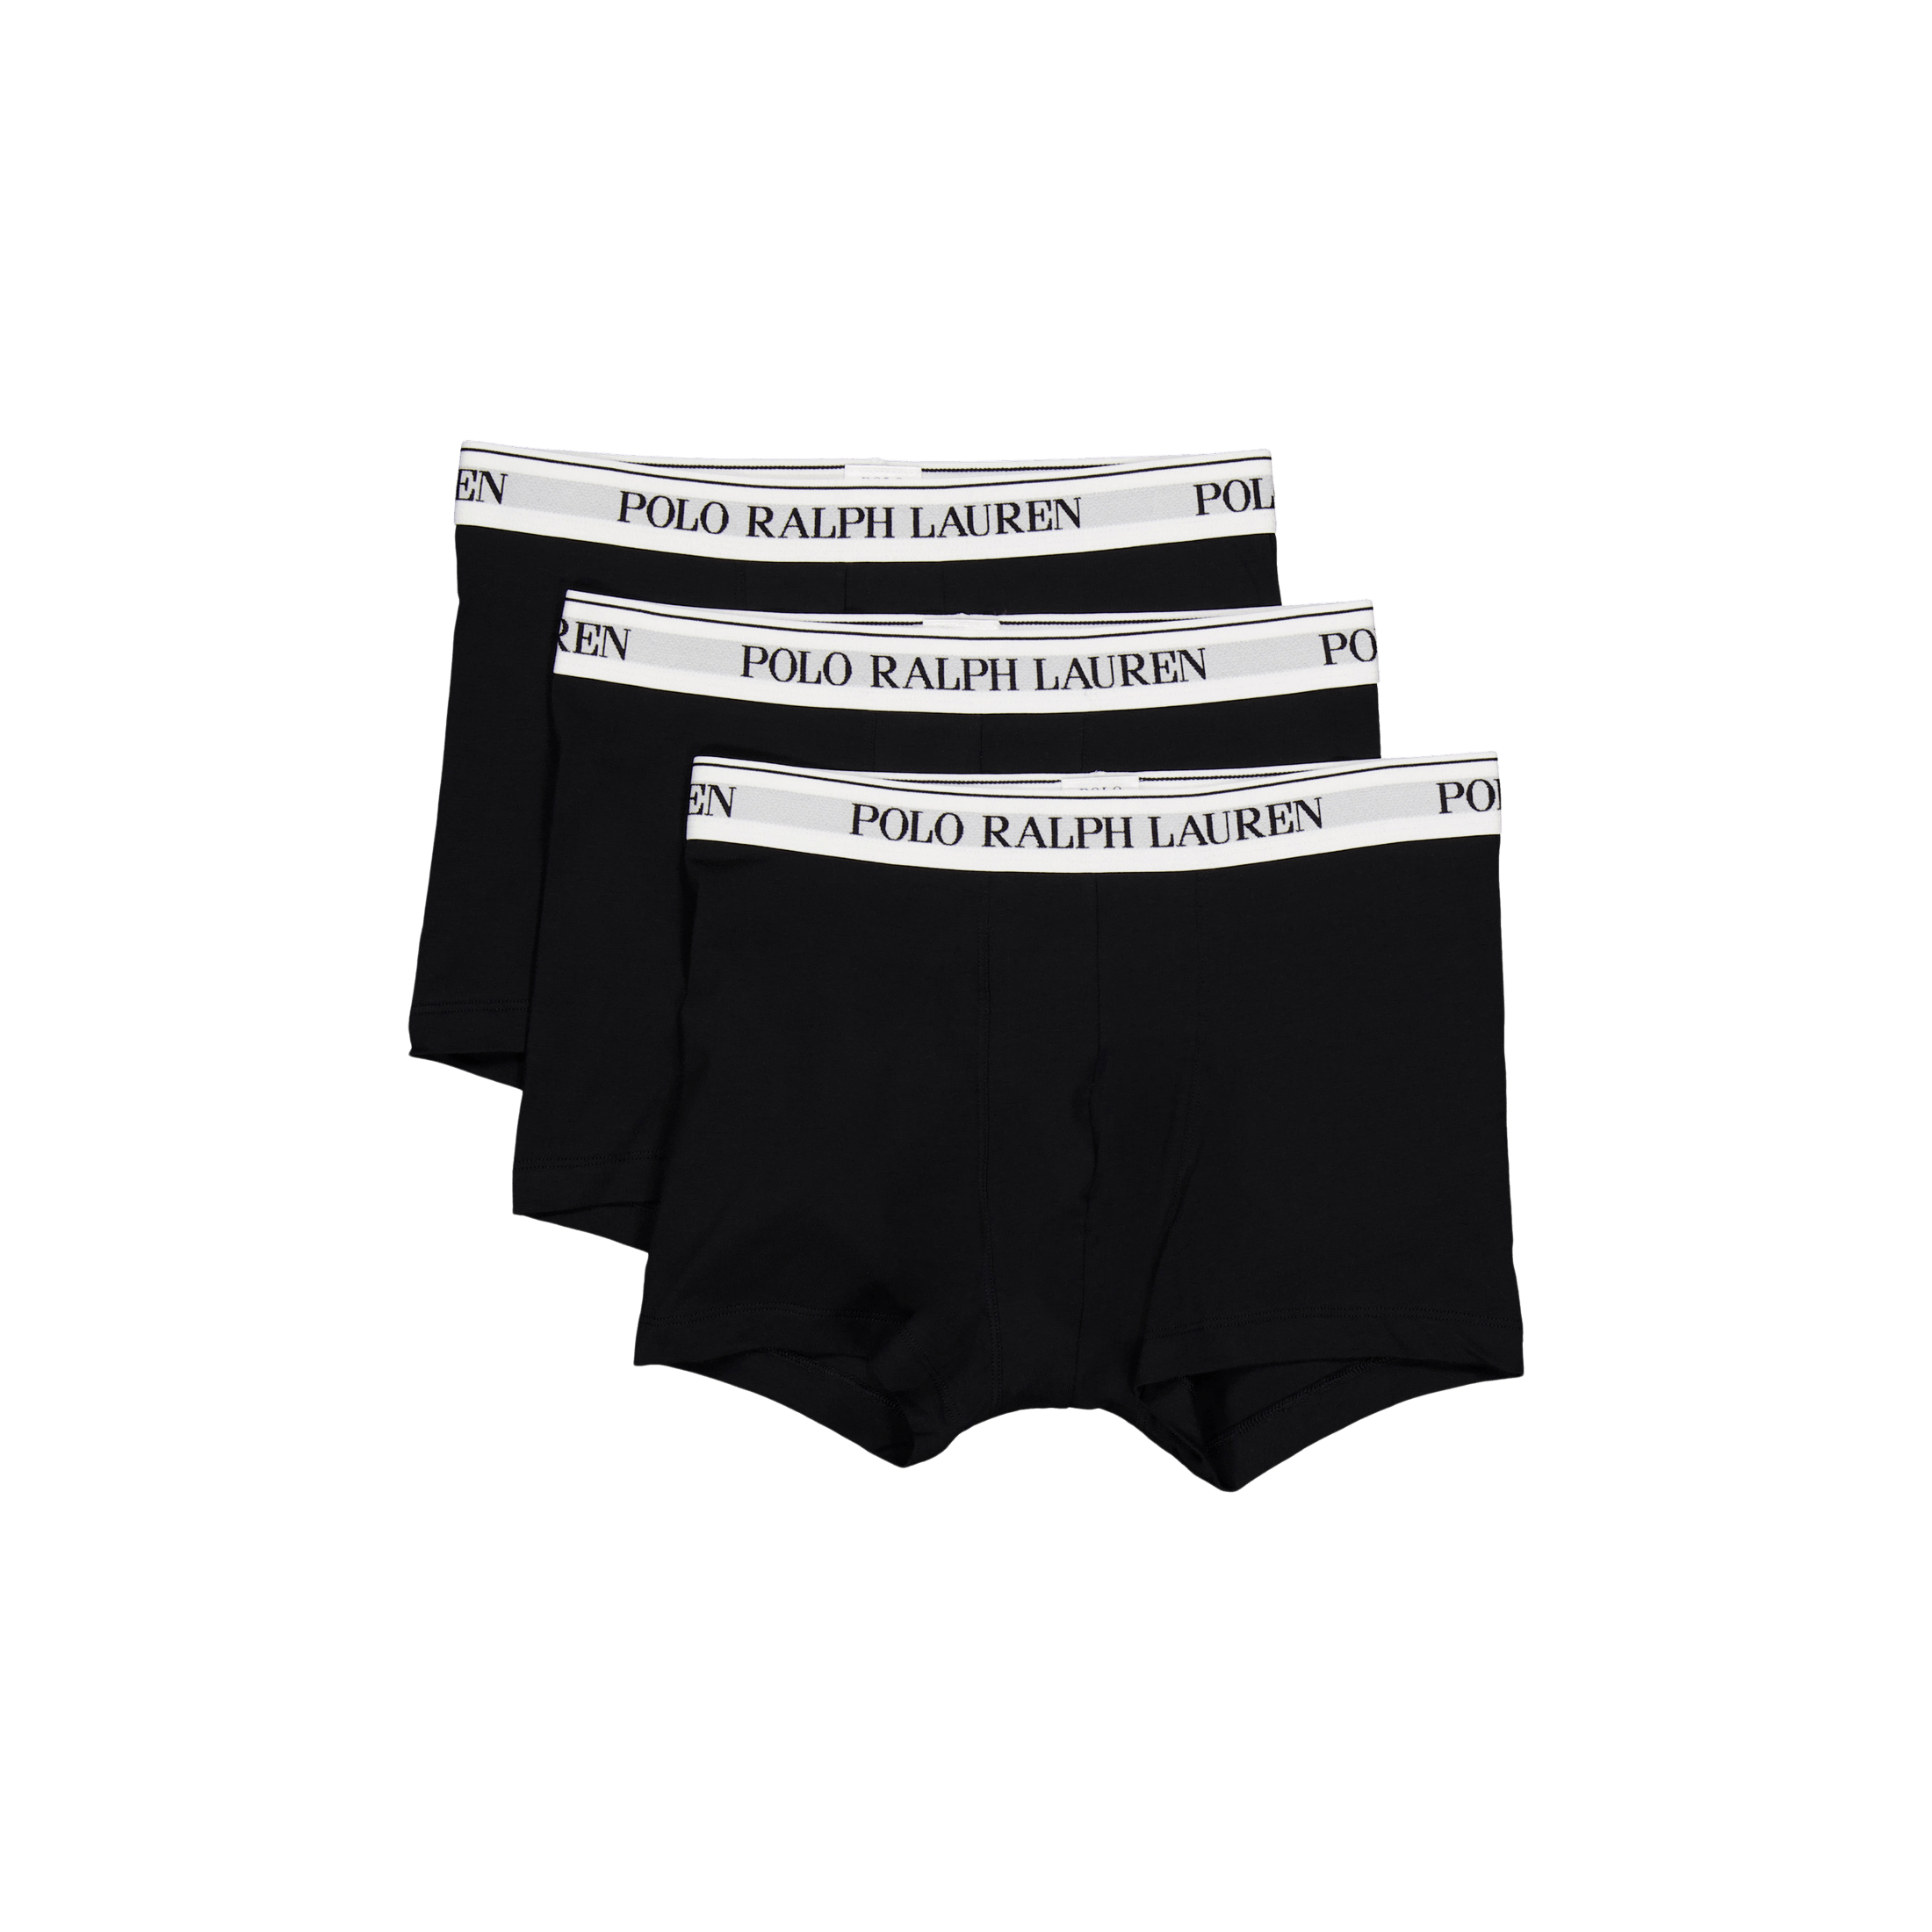 Polo Ralph Lauren 3-Pack Stretch Boxer Brief White at